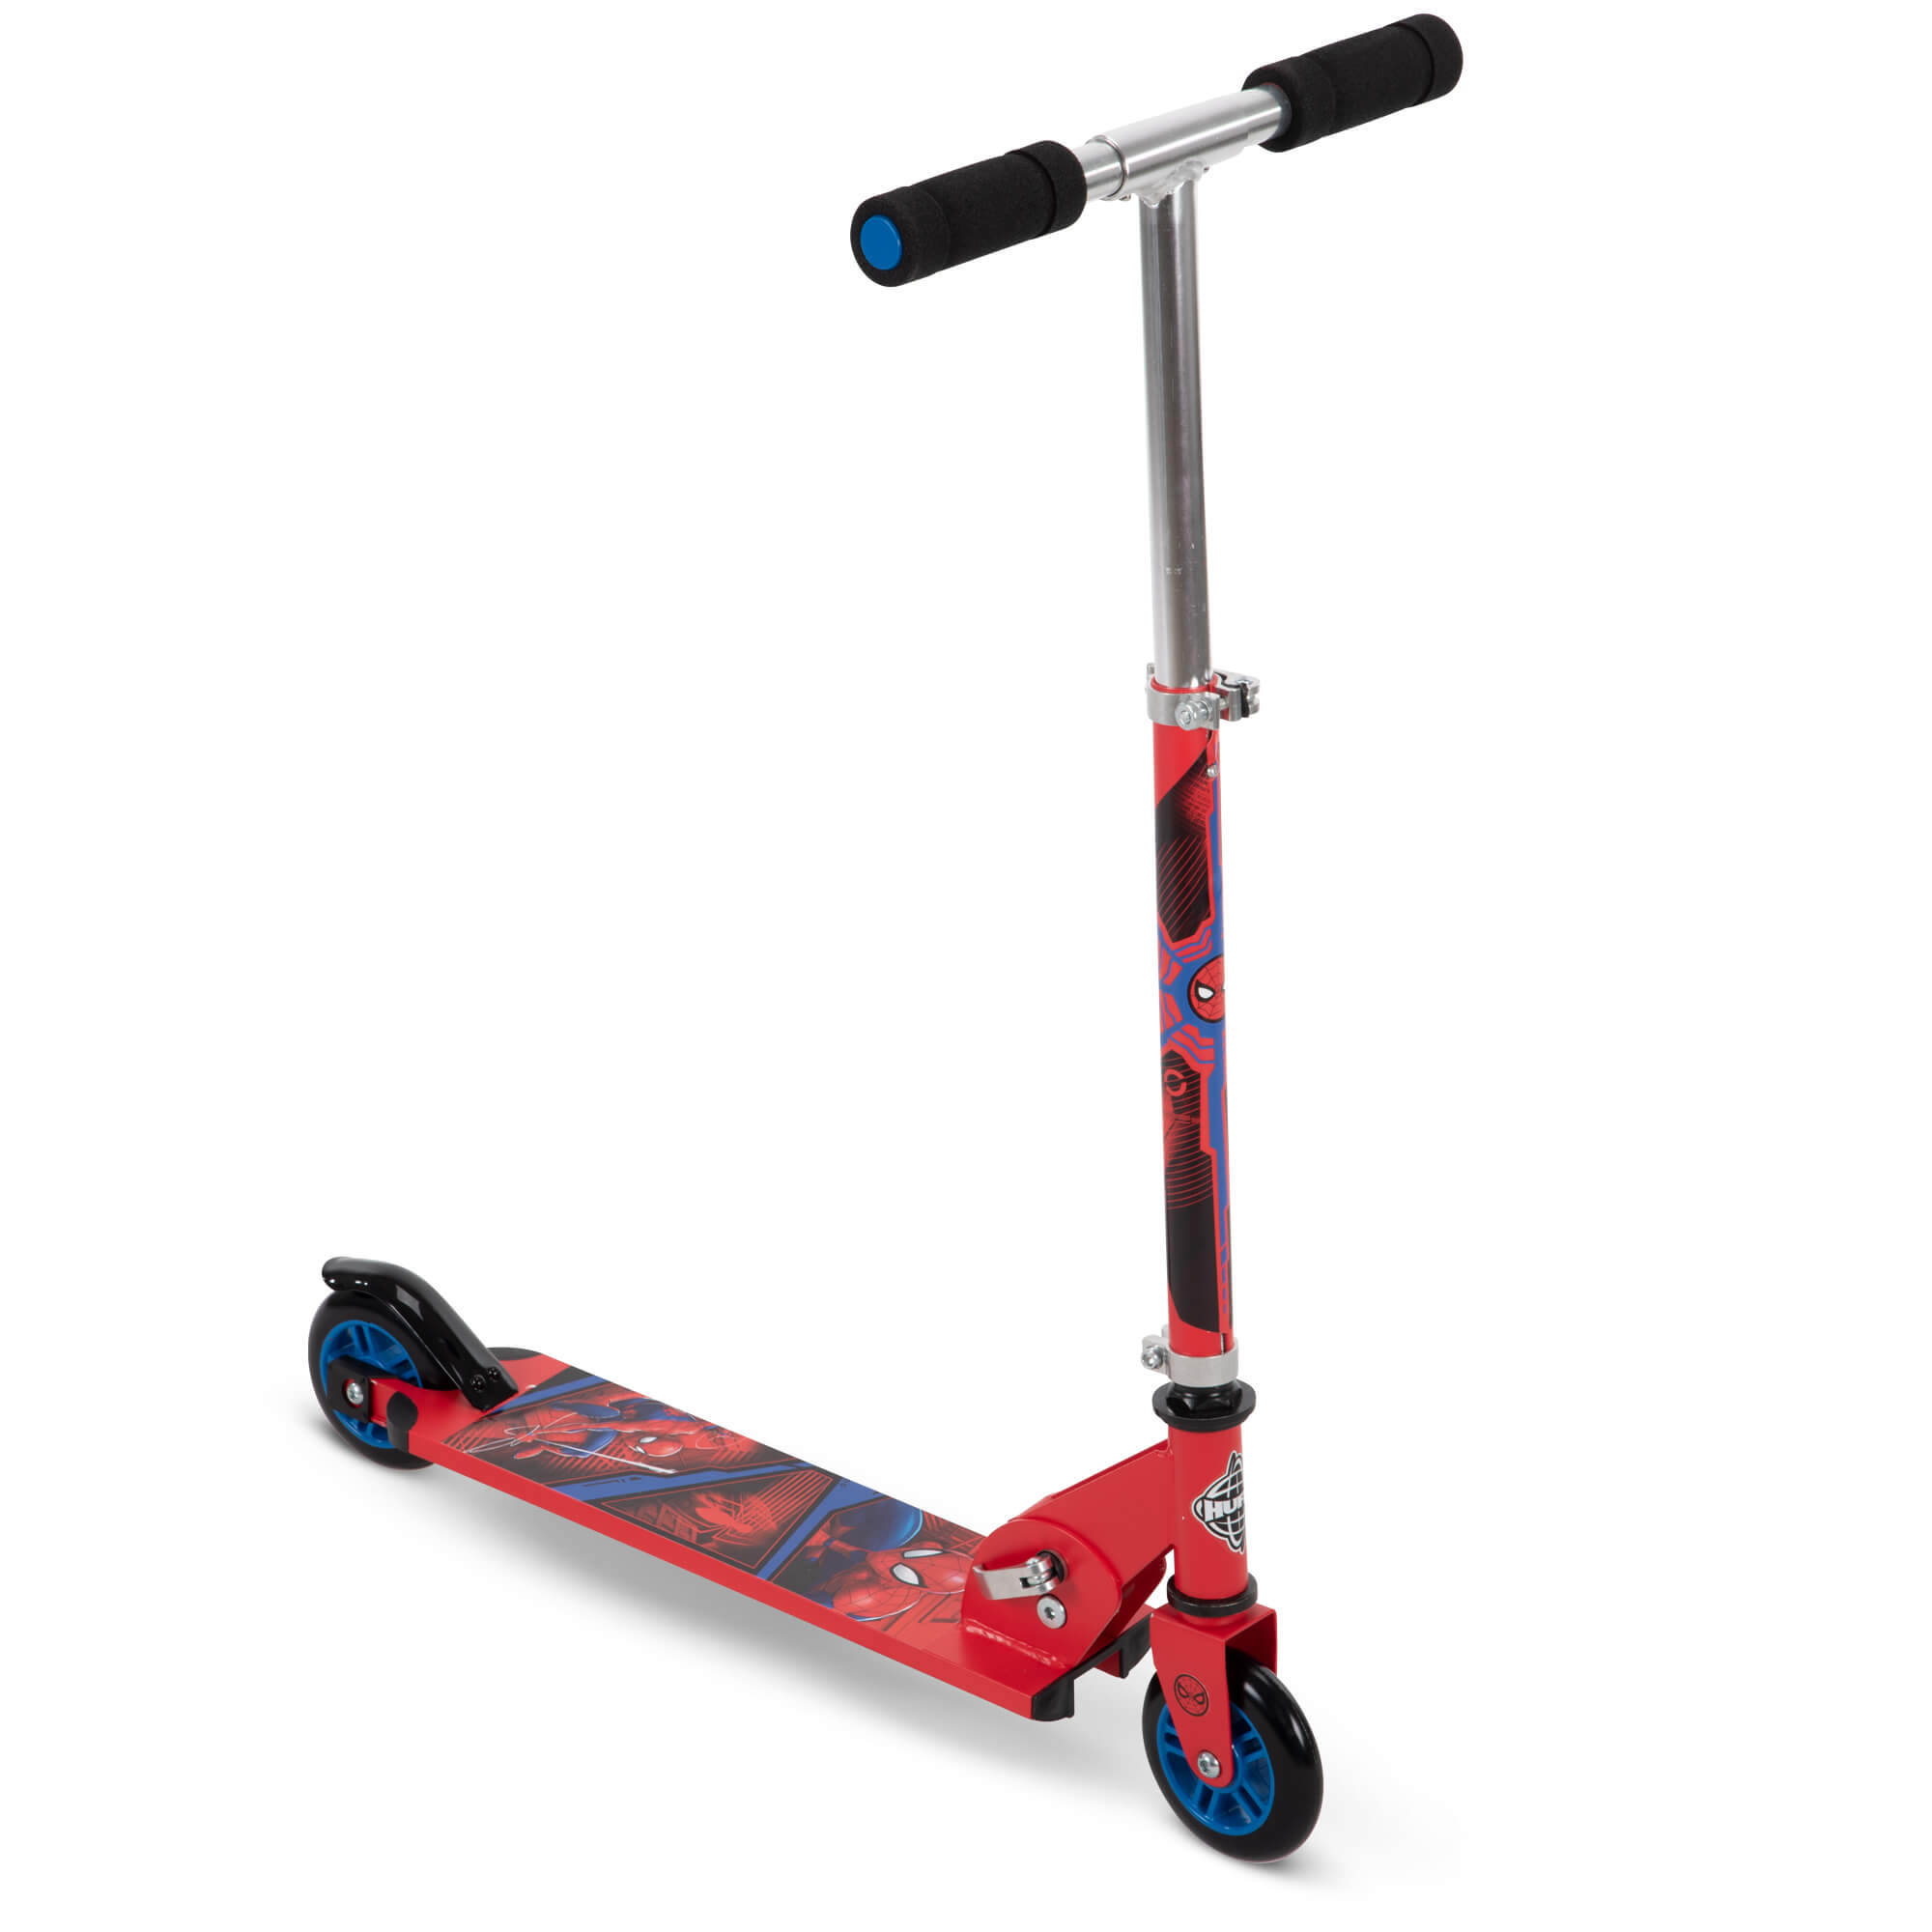 Marvel Spider-Man Inline Folding Kick Scooter for Boys, by Huffy - image 2 of 9